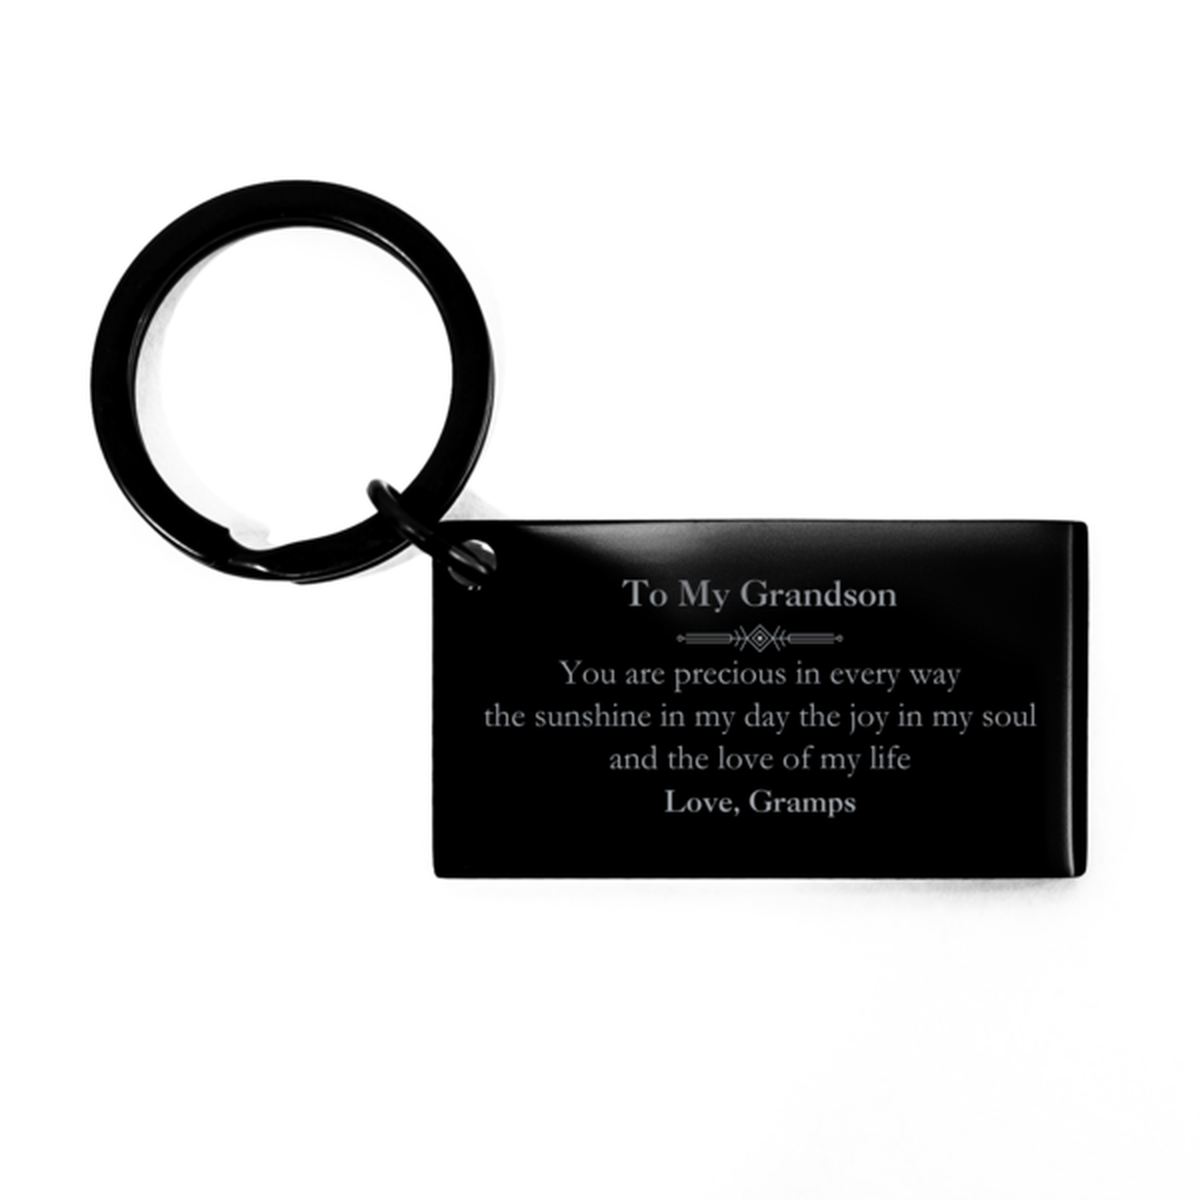 Graduation Gifts for Grandson Keychain Present from Gramps, Christmas Grandson Birthday Gifts Grandson You are precious in every way the sunshine in my day. Love, Gramps